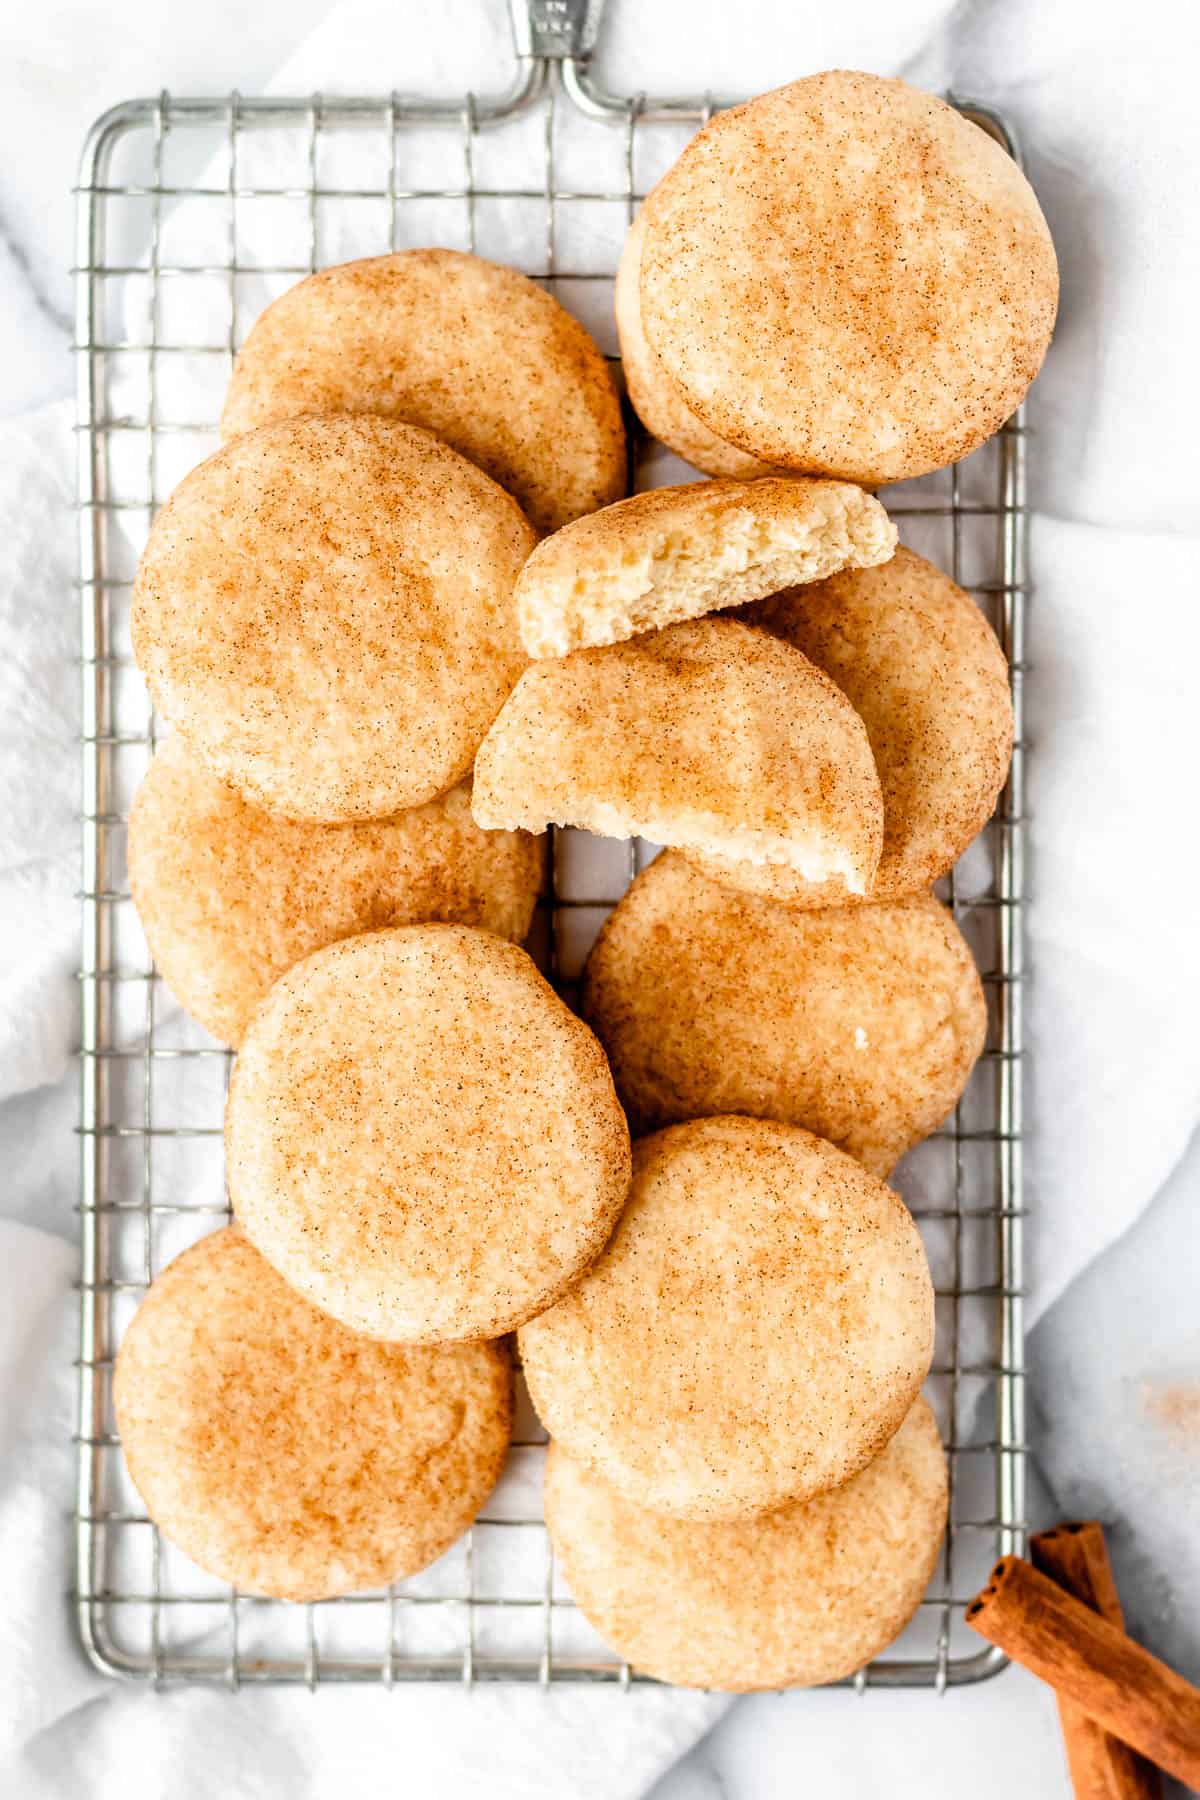 A cooling rack with a bunch of snickerdoodle cookies on it with one cookie broken in half to show the thickness and texture.